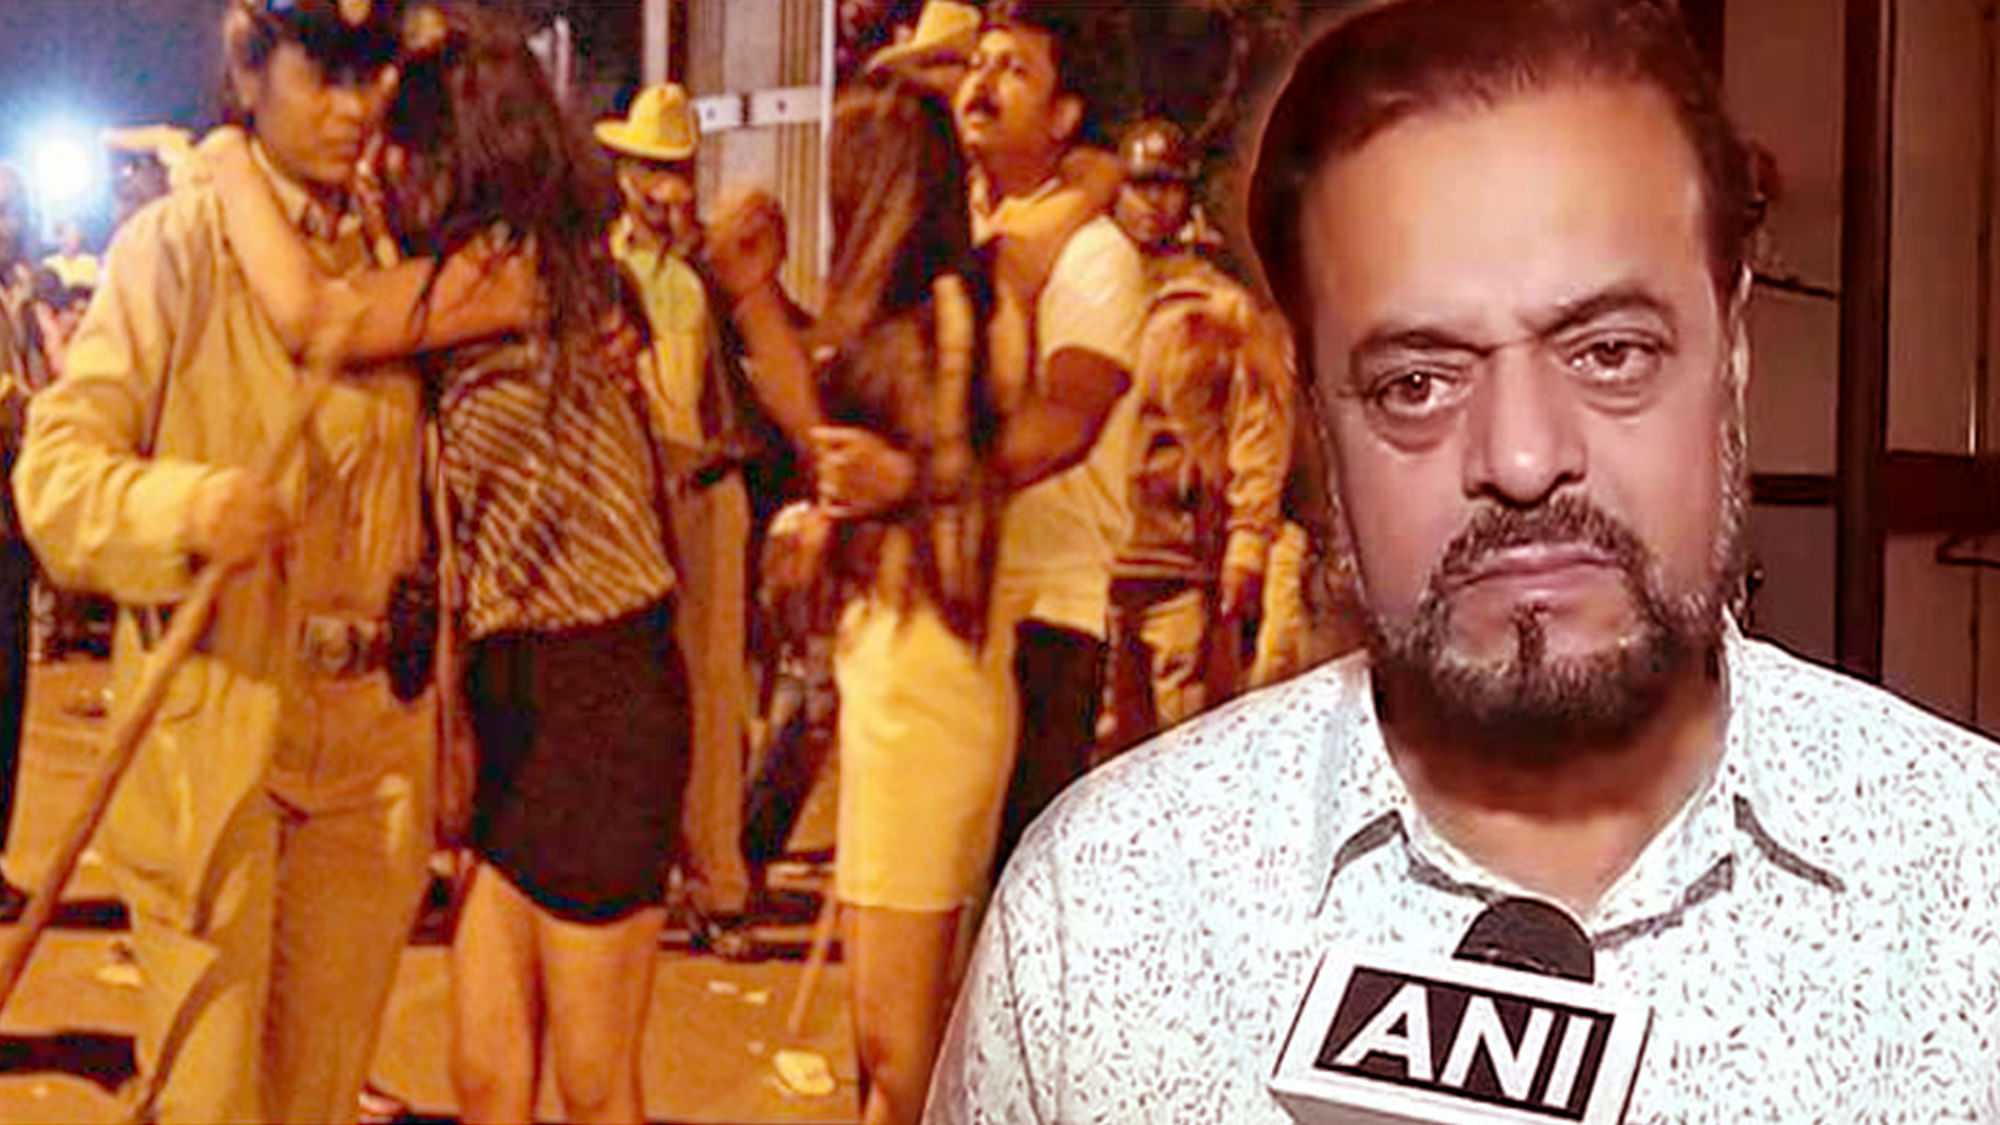 Abu Azmi’s comment on mass molestation in Bengaluru sparked an outrage. (Photo: <b>The Quint</b>)